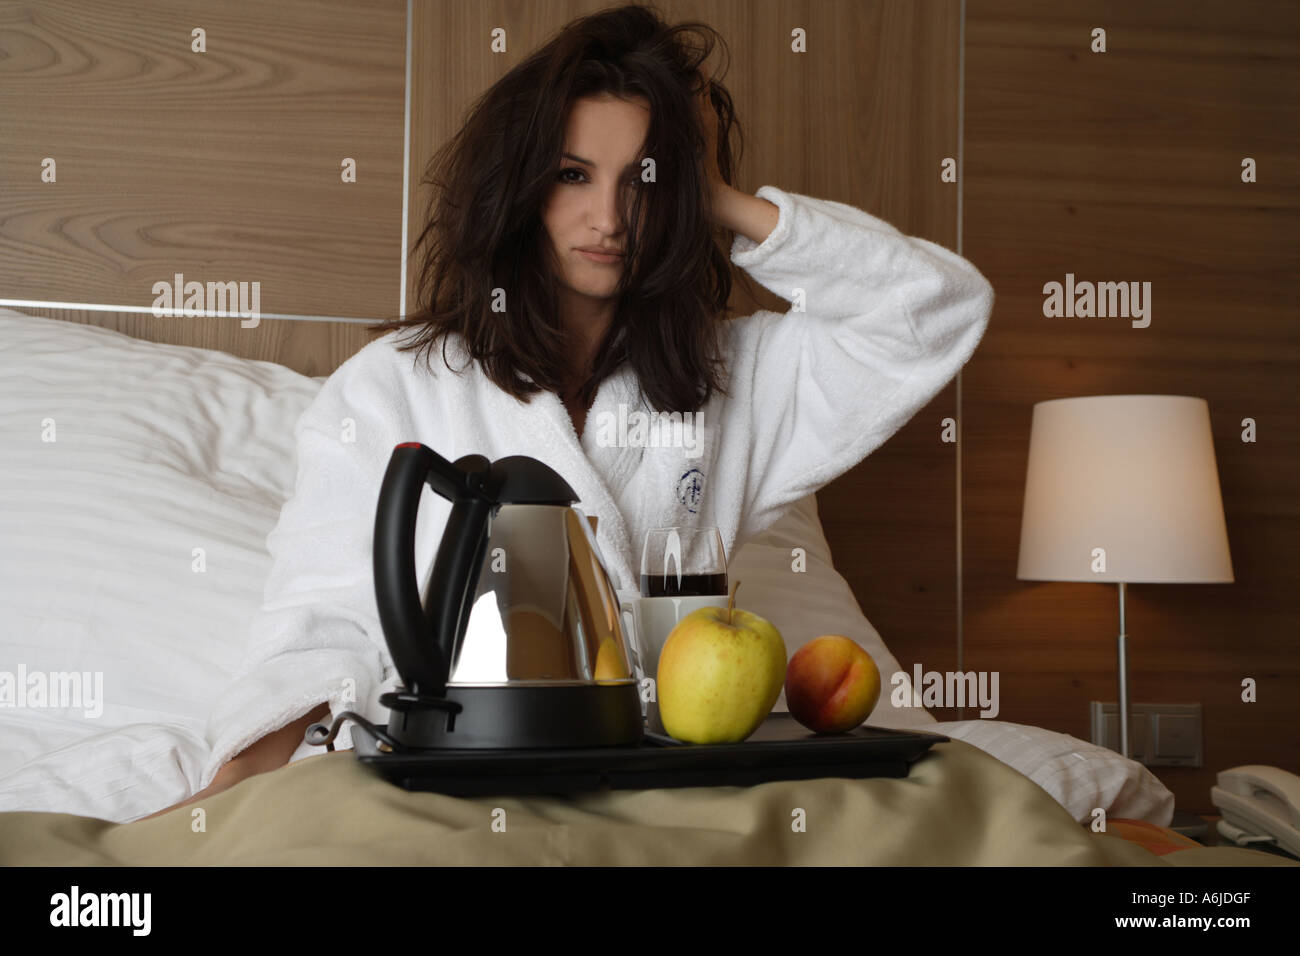 dozy young woman sitting in bed with a breakfast tray in her lap Stock Photo